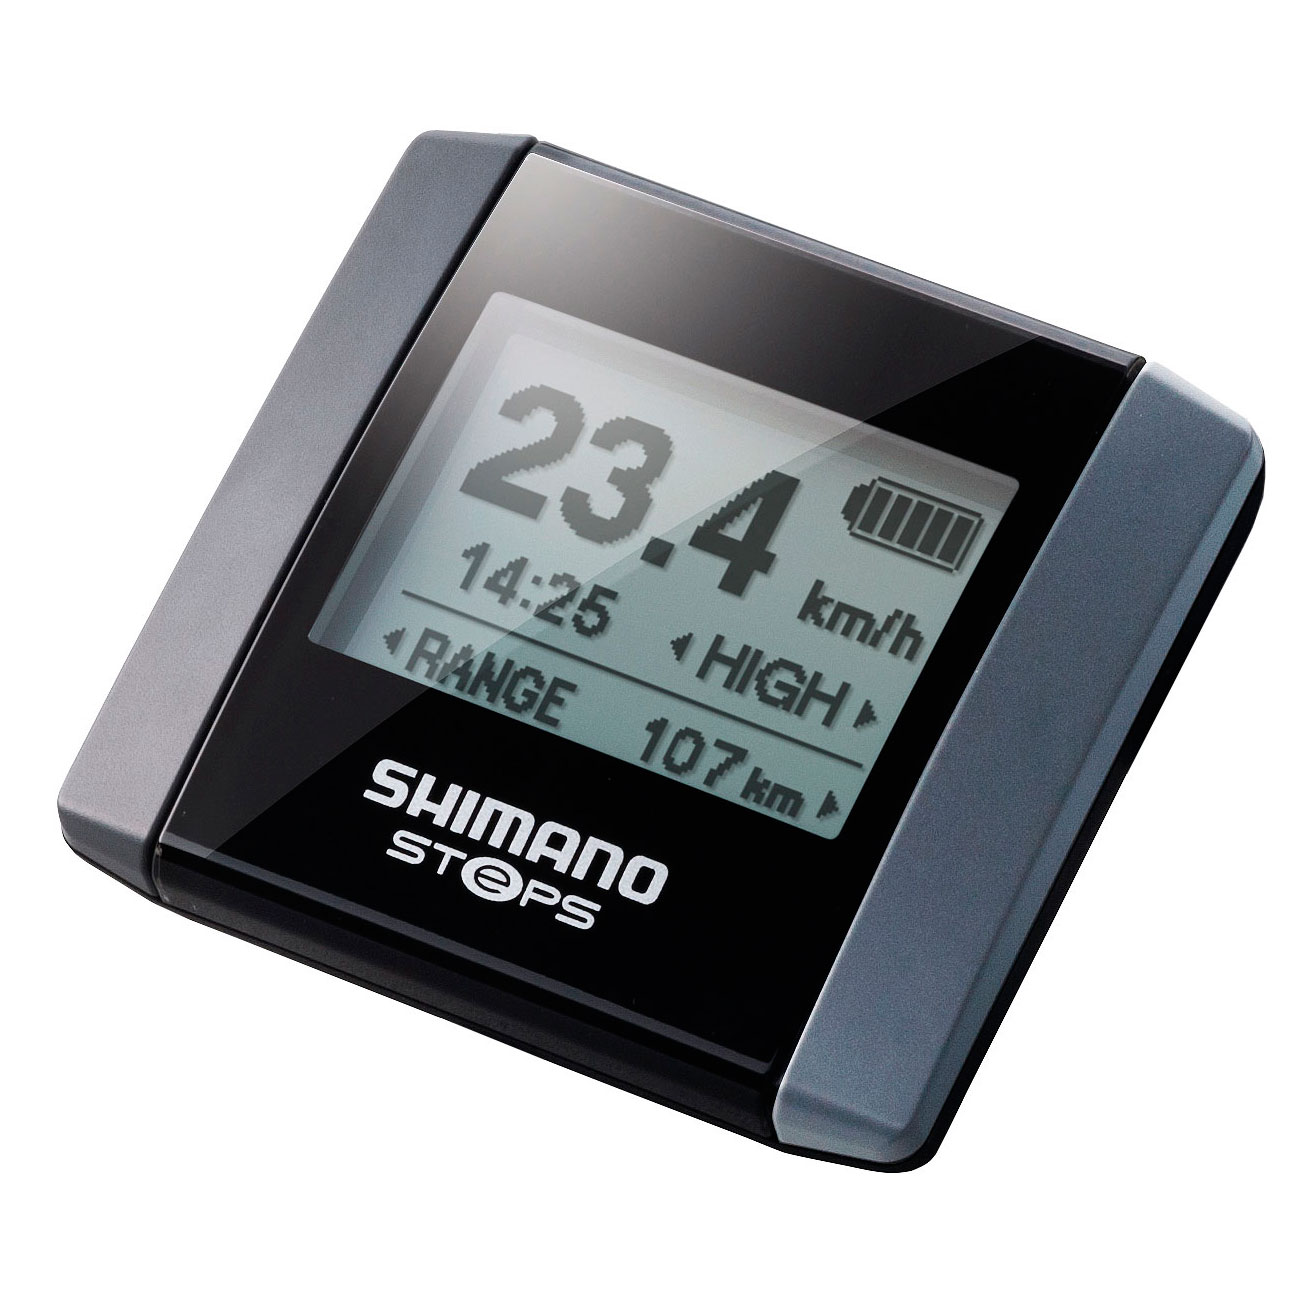 Productfoto van Shimano STePS SC-E6000 Display without Mounting - black/silver